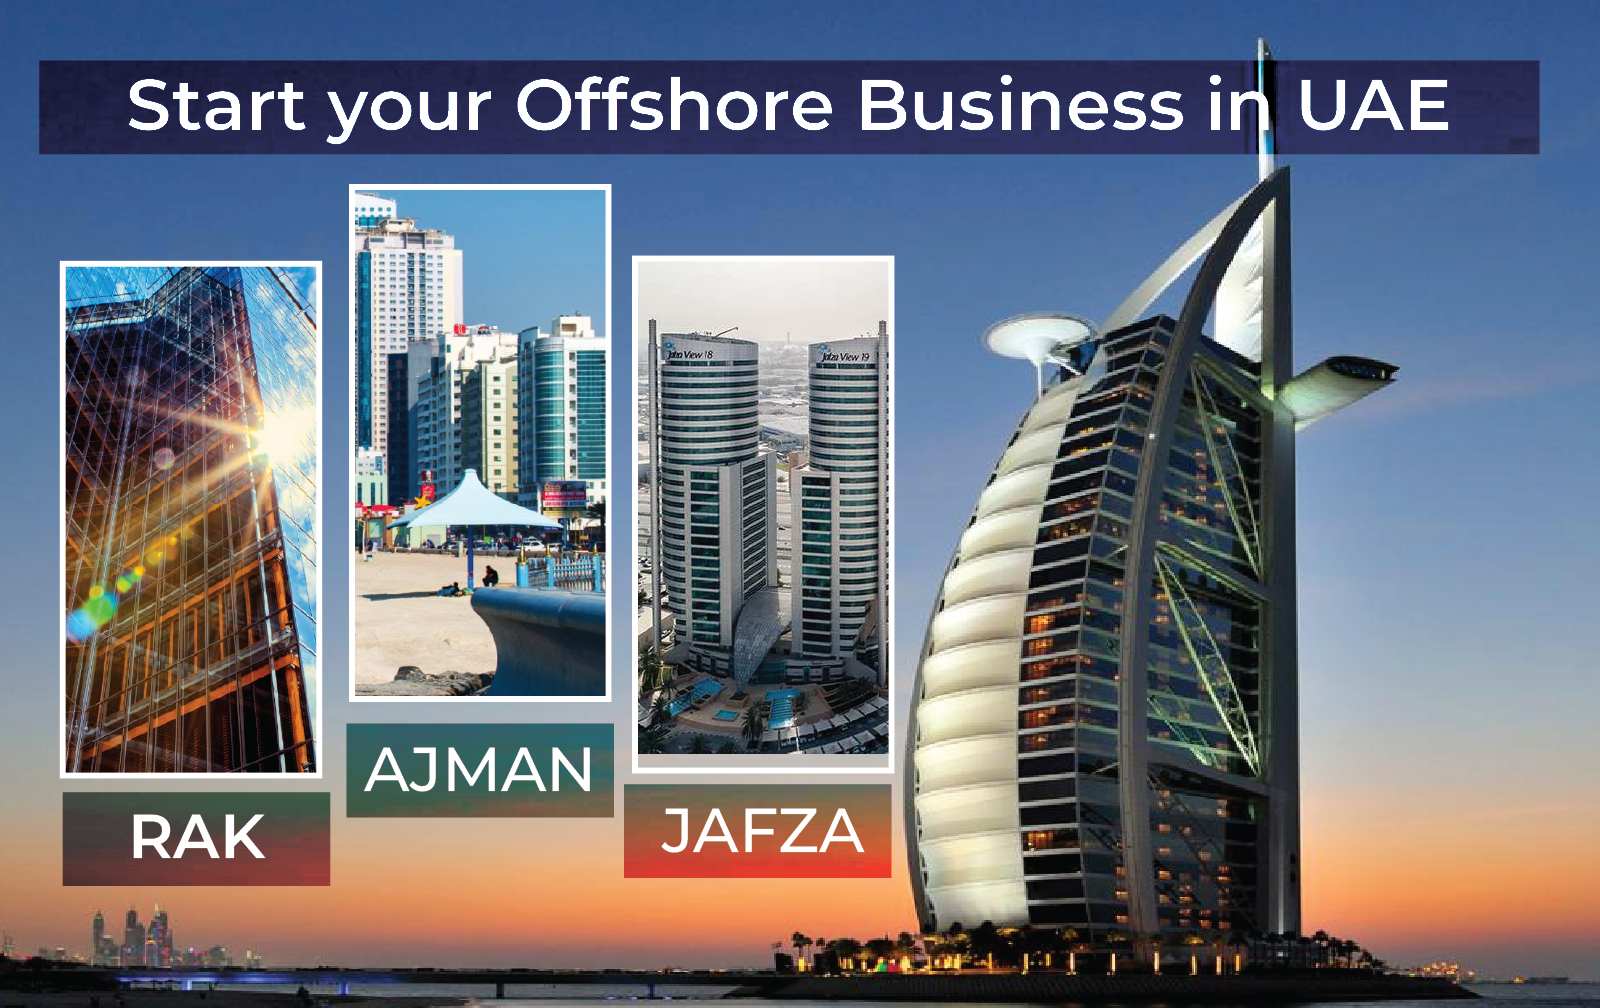 image of three offshores in UAE. RAK Offshore, JAFZA Offshore and AJMAN Offshore